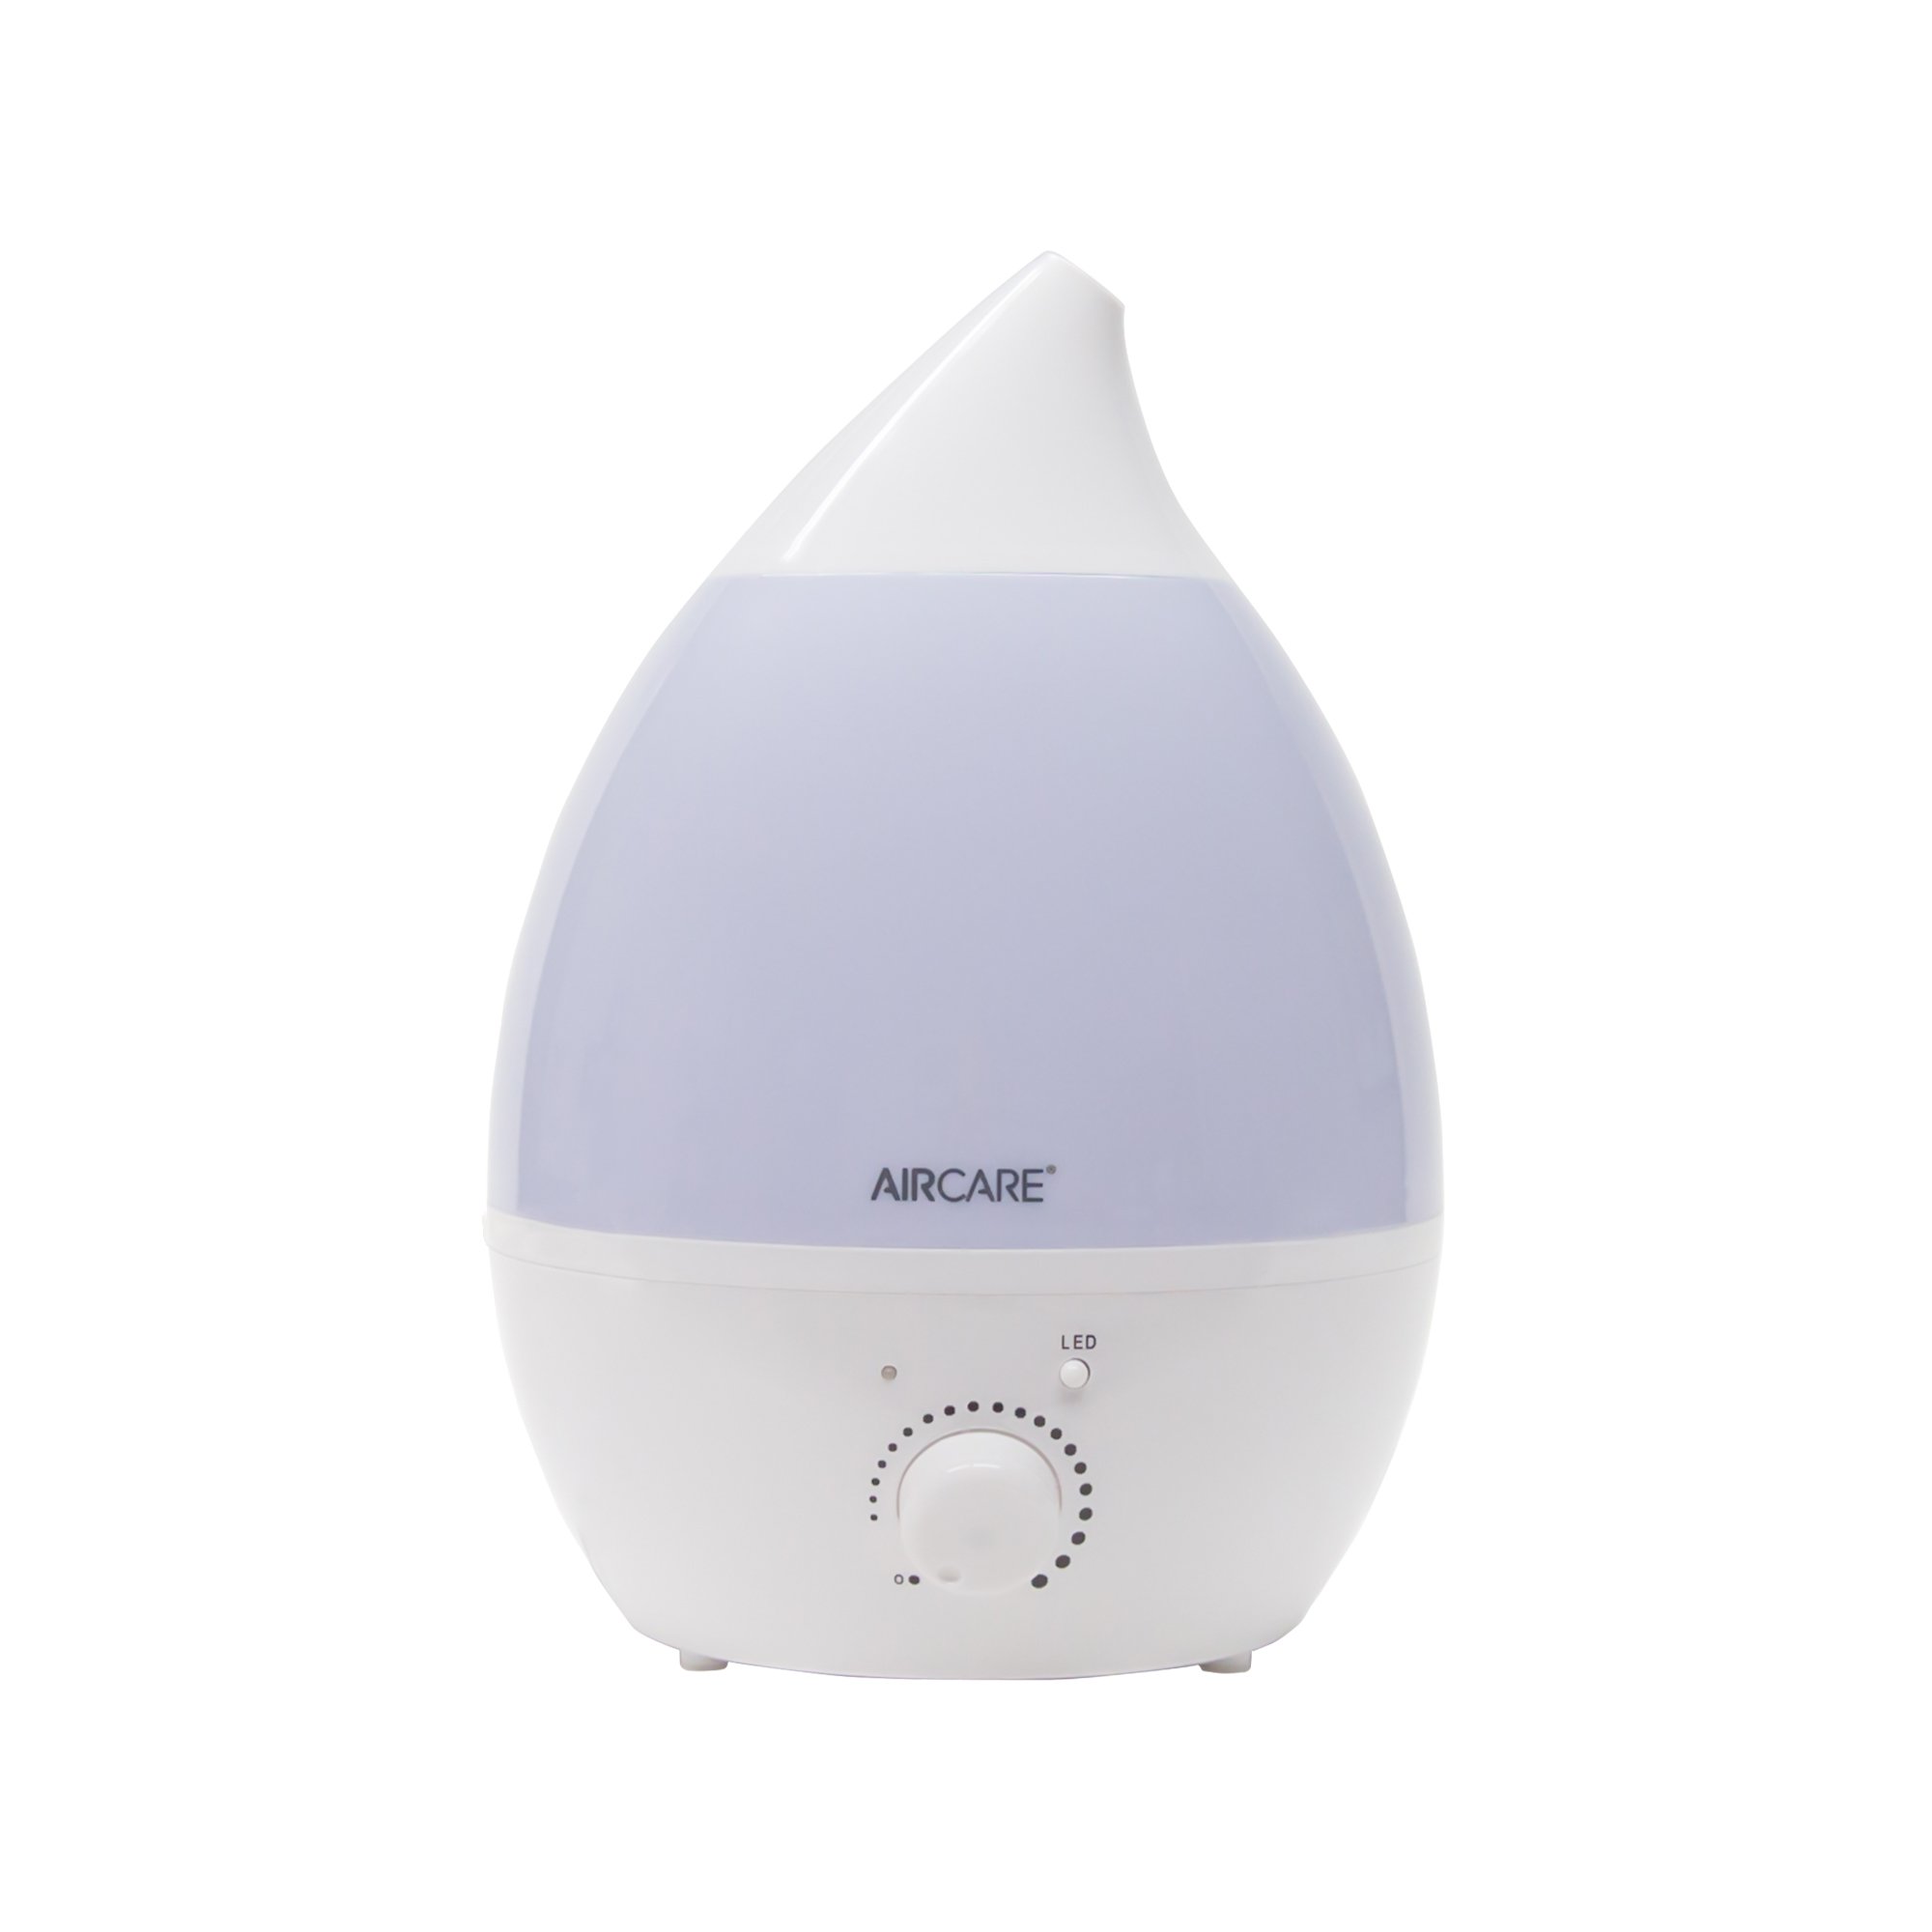 AIRCARE AUV10AWHT Aurora Mini Ultrasonic Humidifier with Aroma Diffuser and Multicolor LED Night Light, White - image 1 of 9